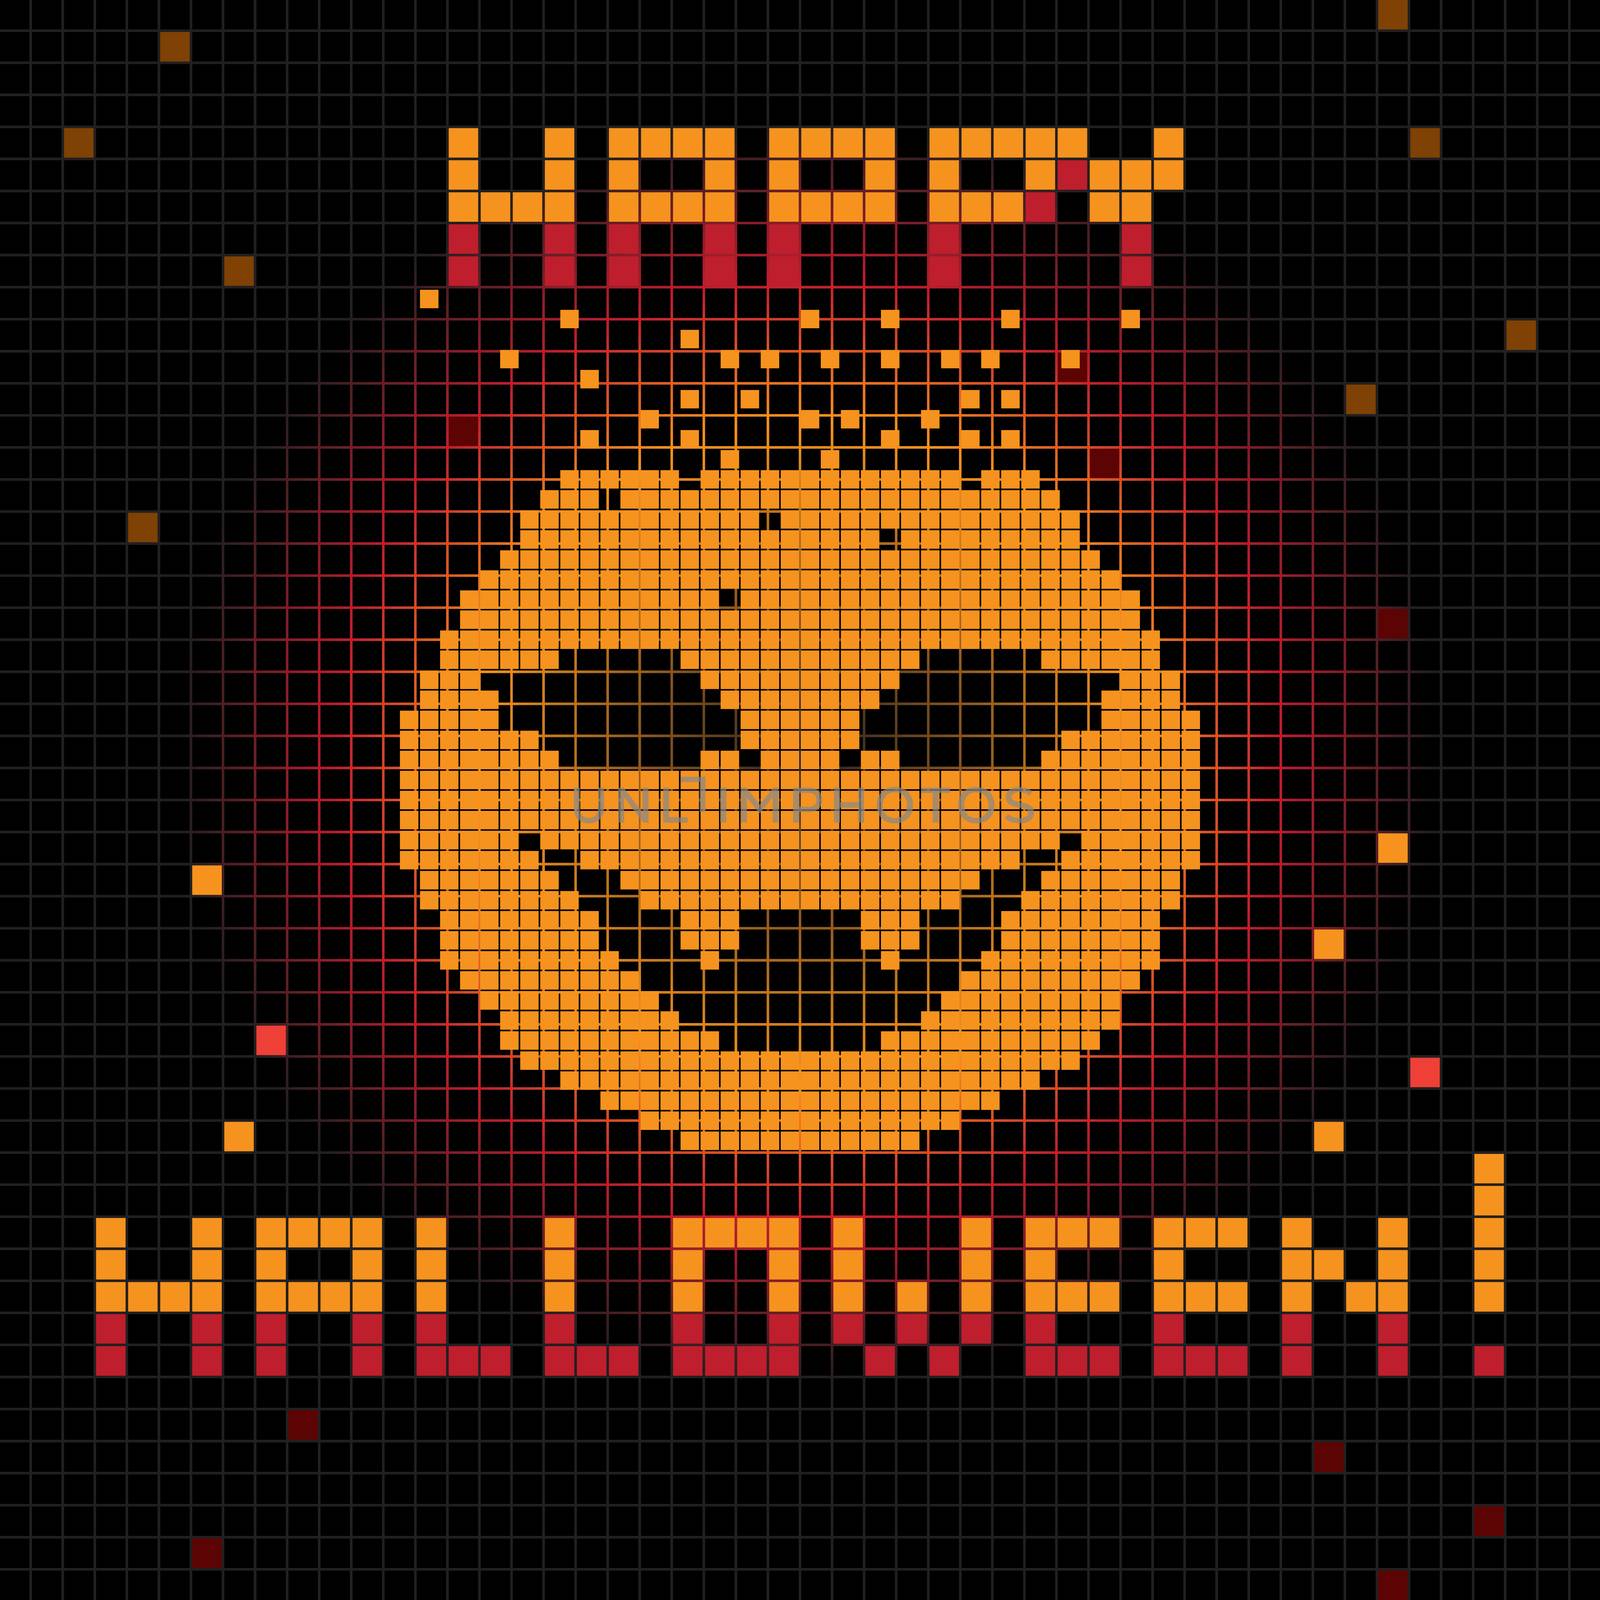 Halloween greetings card, pixel illustration of a scoreboard composition with digital drawing of a pumpkin laughing and holiday text